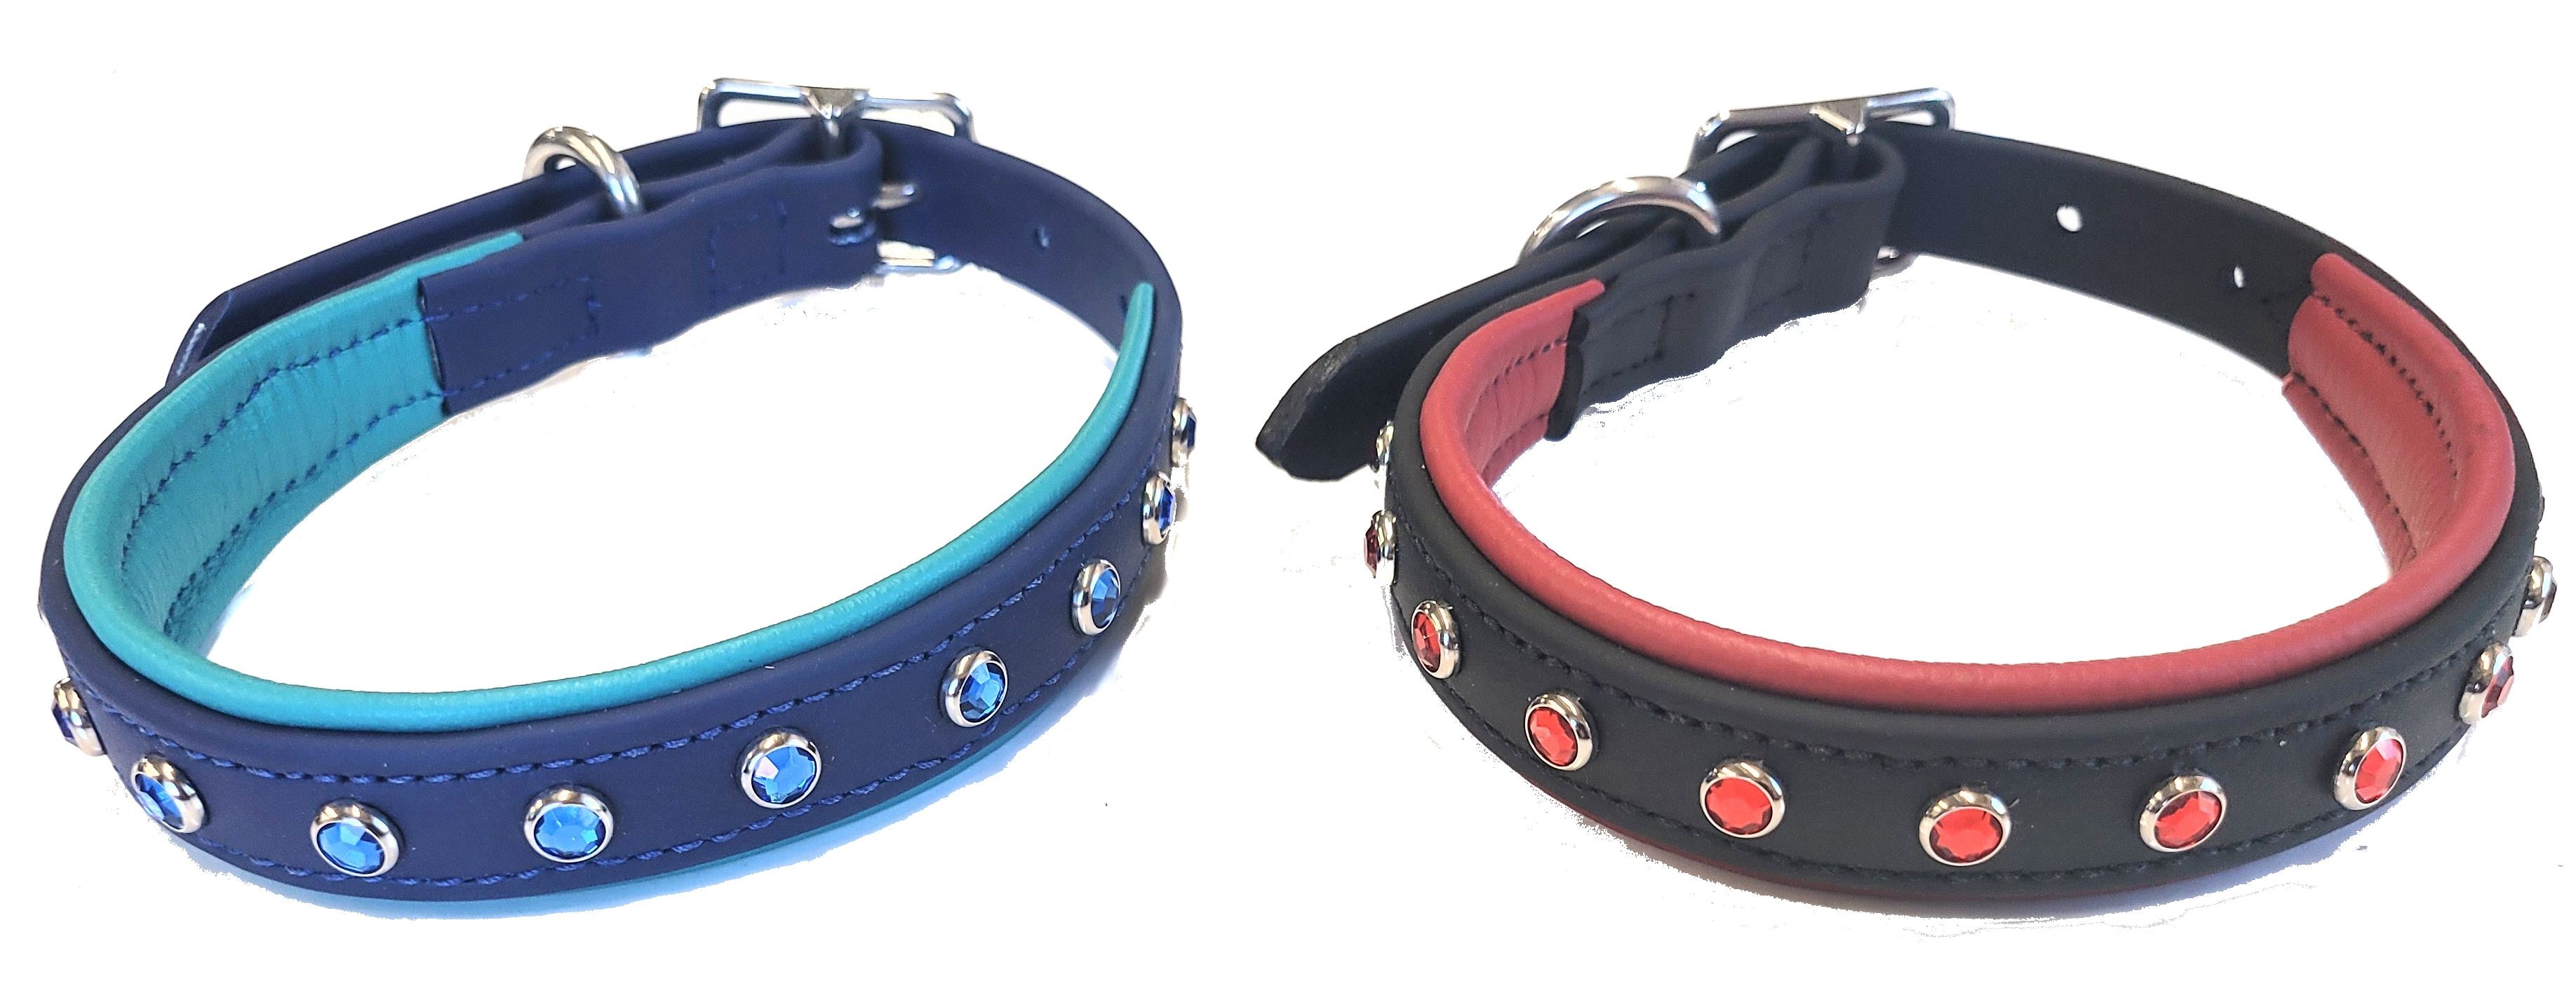  Bling Dog Collars with colored Crystals-Create your Own!